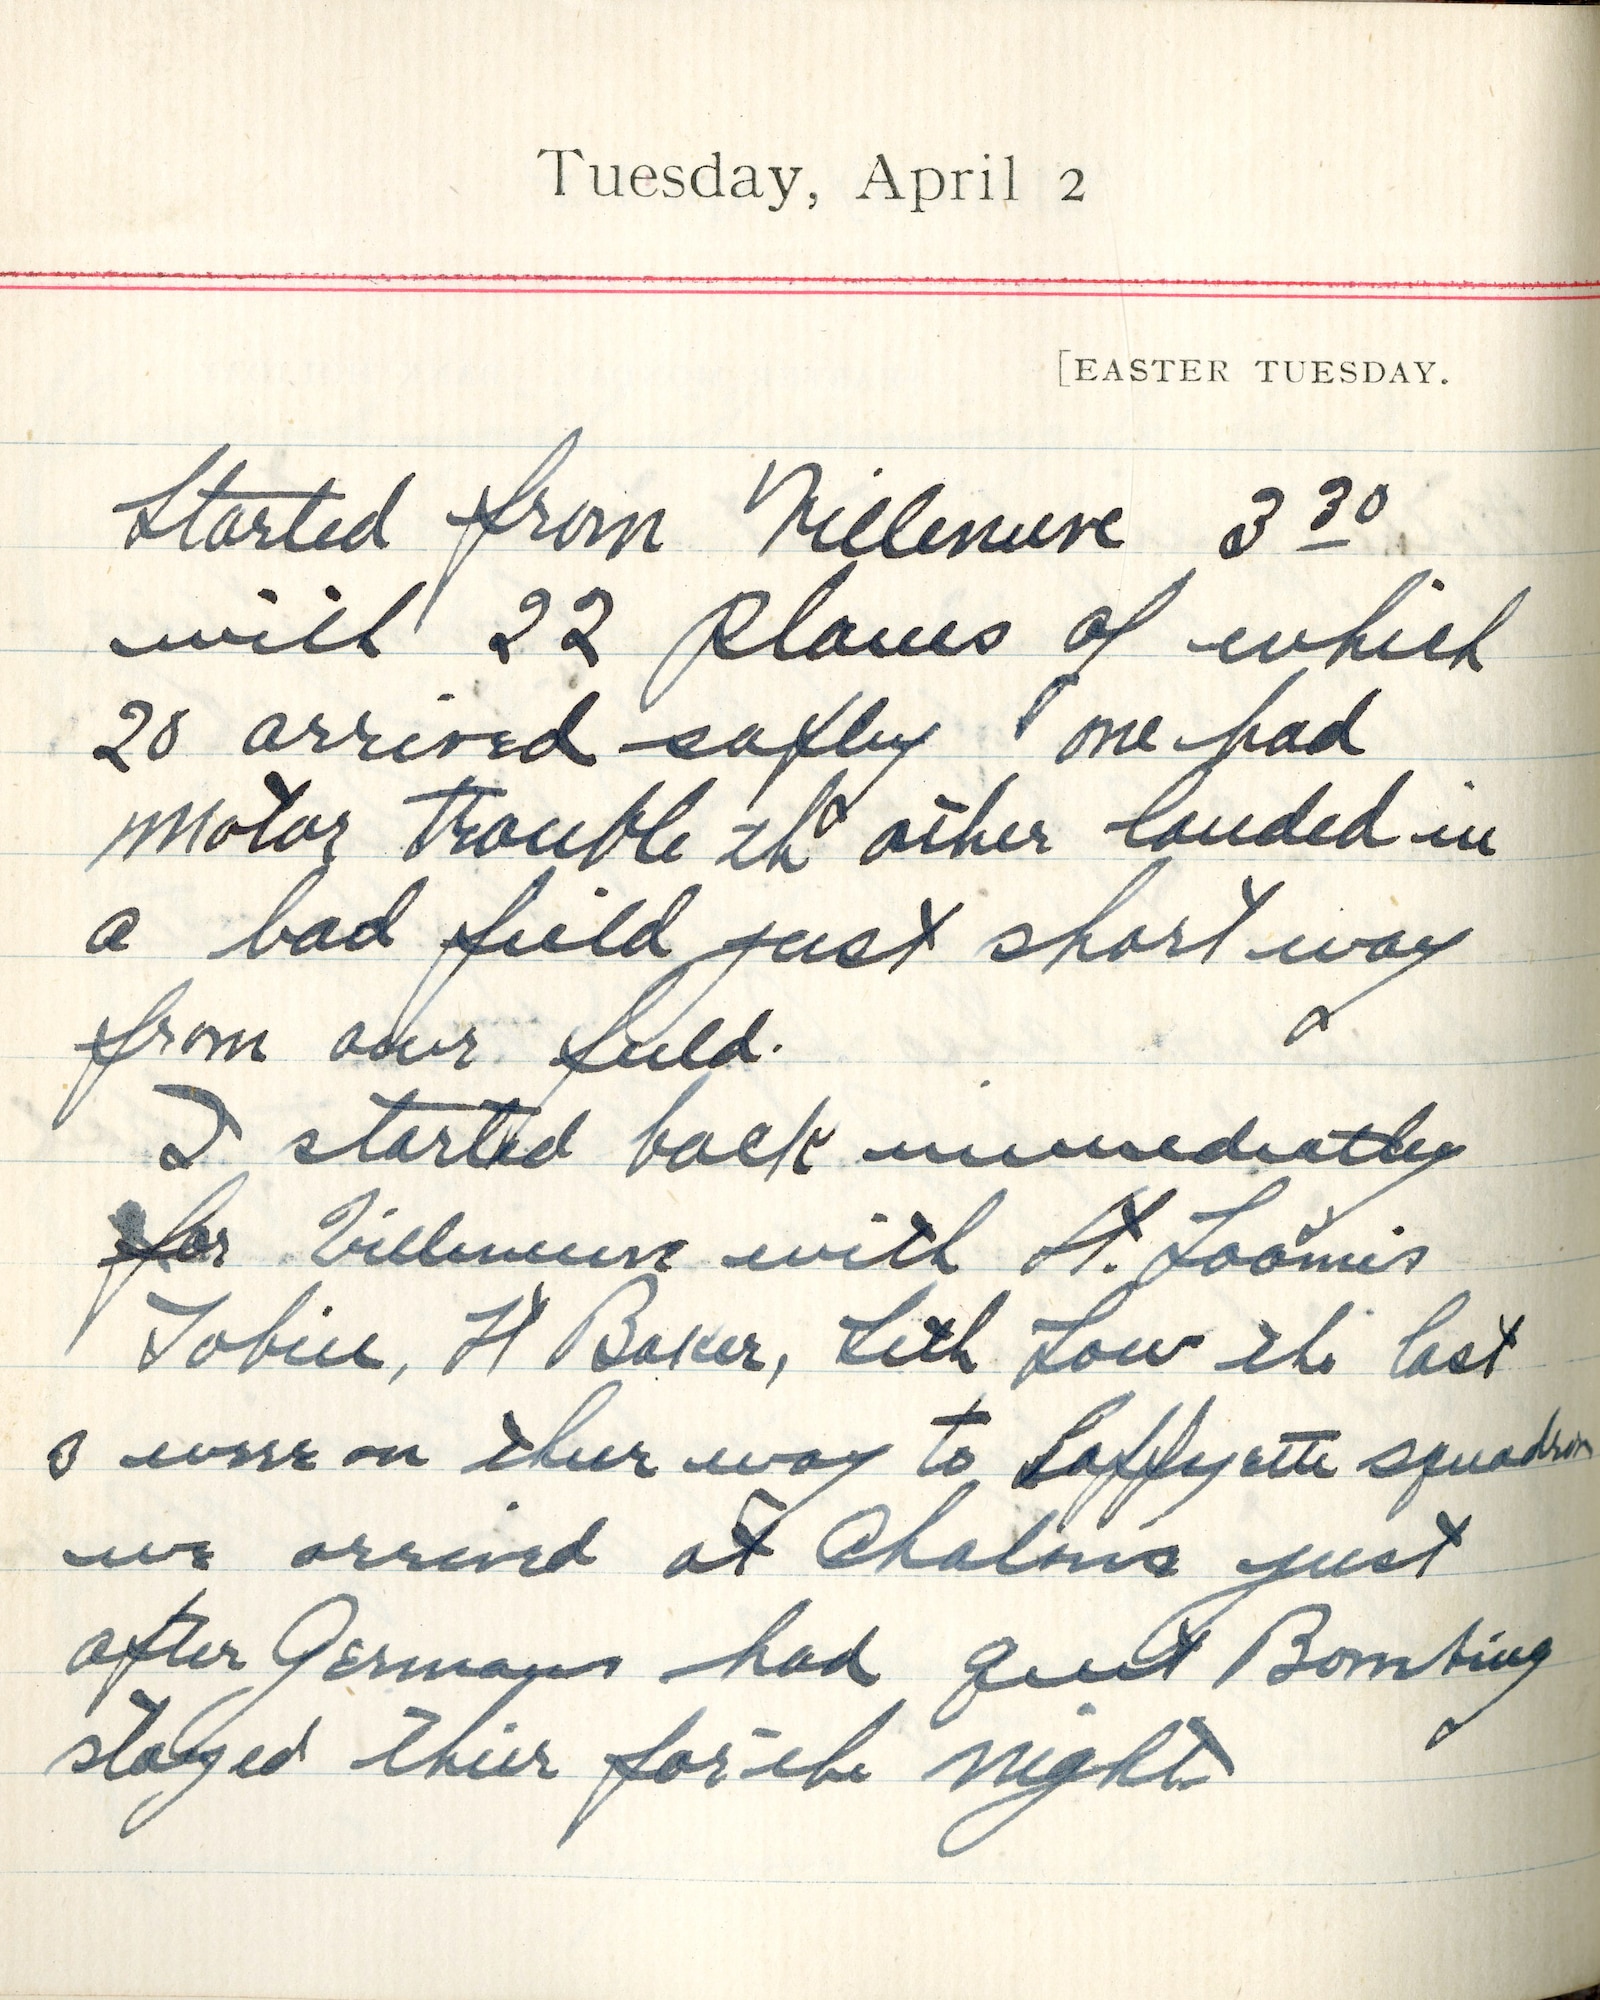 Capt. Edward V. Rickenbacker's 1918 wartime diary entry. (04/02/1918). Started from Villeneuve 3:30 with 22 planes of which 20 arrived safely.  One had motor trouble, the other landed in a bad field just short way from our field.

I started back immediately for Villeneuve with Lt. [William F.] Loomis, Tobin, Lt. [Hobart A.H.] Baker, Seth Low.  The last 3 were on their way to Lafayette squadron.  We arrived at Chalons just after Germans had quit bombing.  Stayed there for the night.